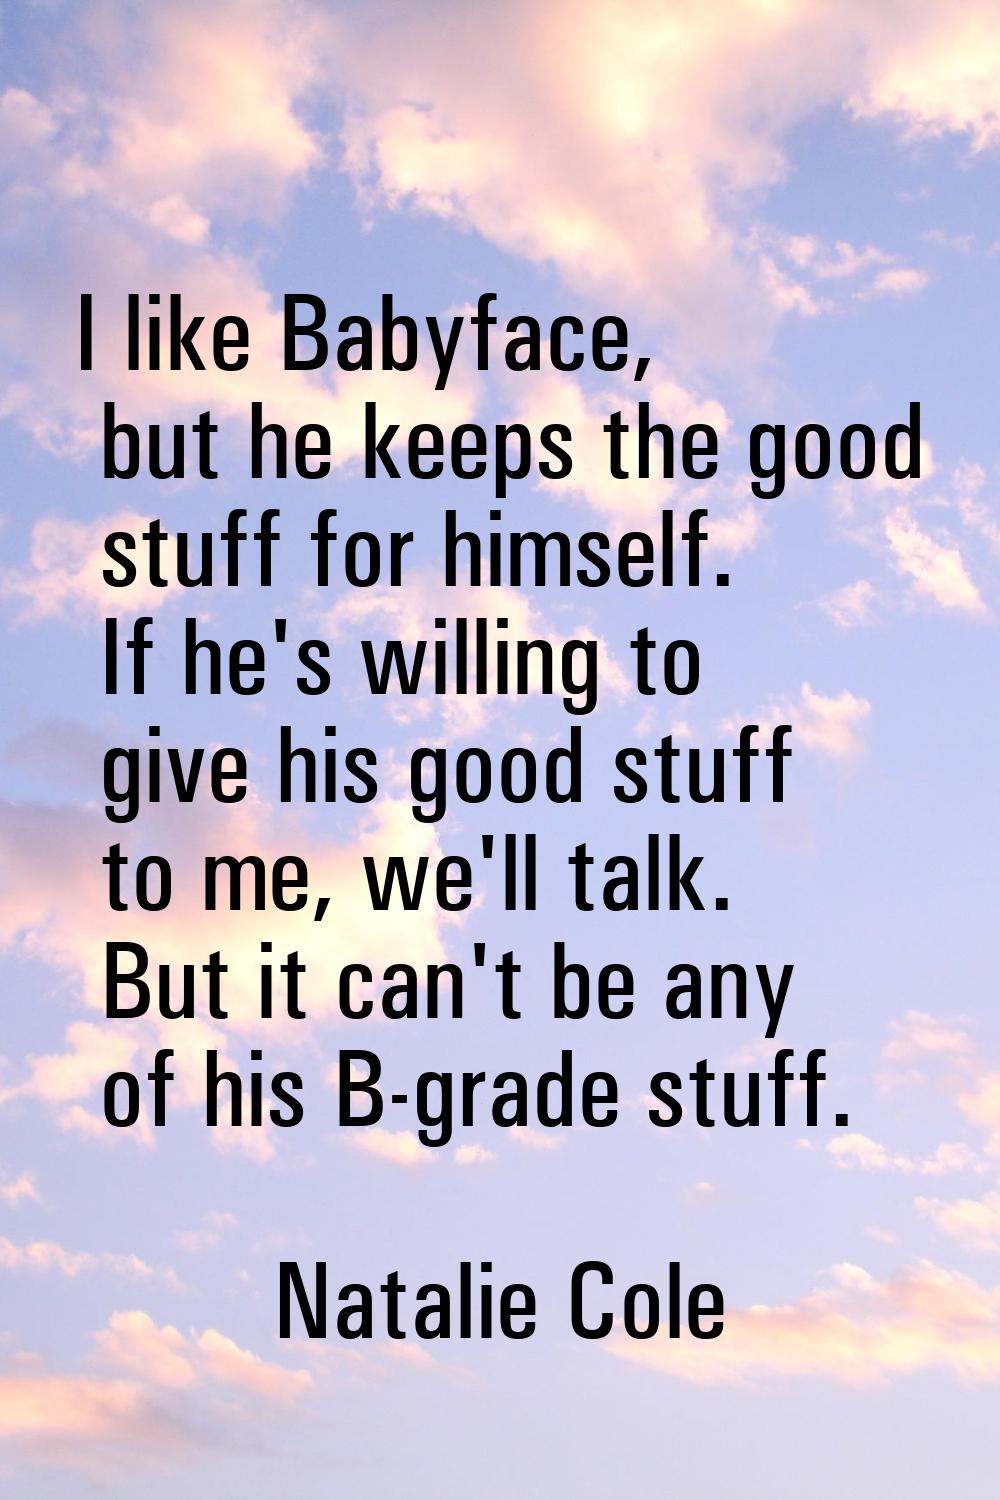 I like Babyface, but he keeps the good stuff for himself. If he's willing to give his good stuff to